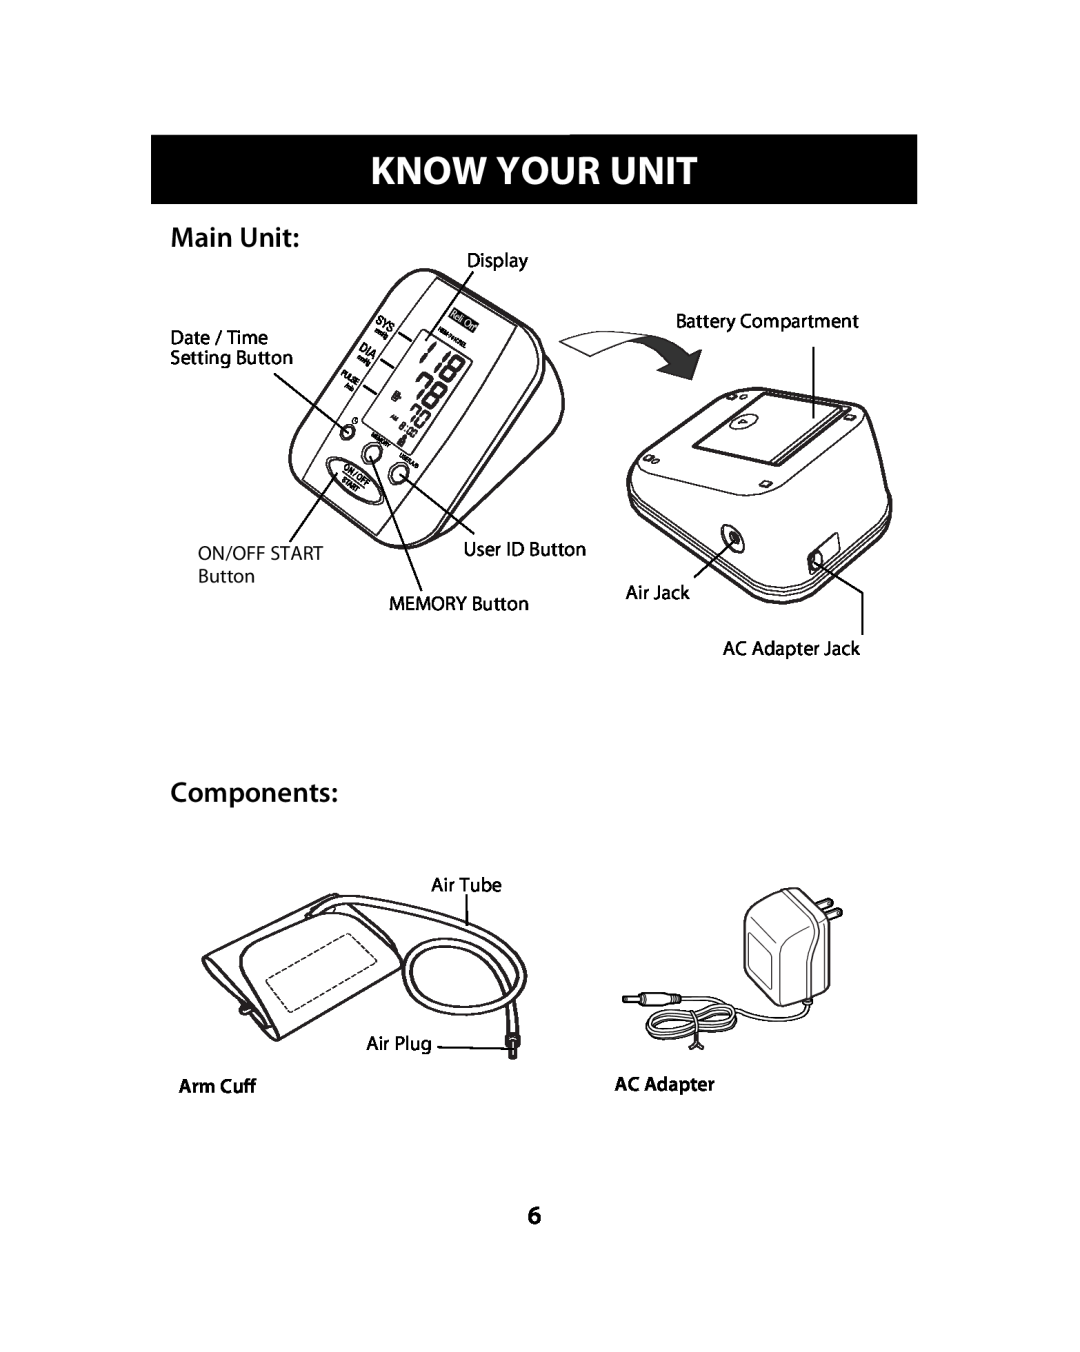 Omron Healthcare HEM-741CREL Know Your Unit, Operating Instructions, Main Unit, Components, Arm Cuff, Air Jack, AC Adapter 